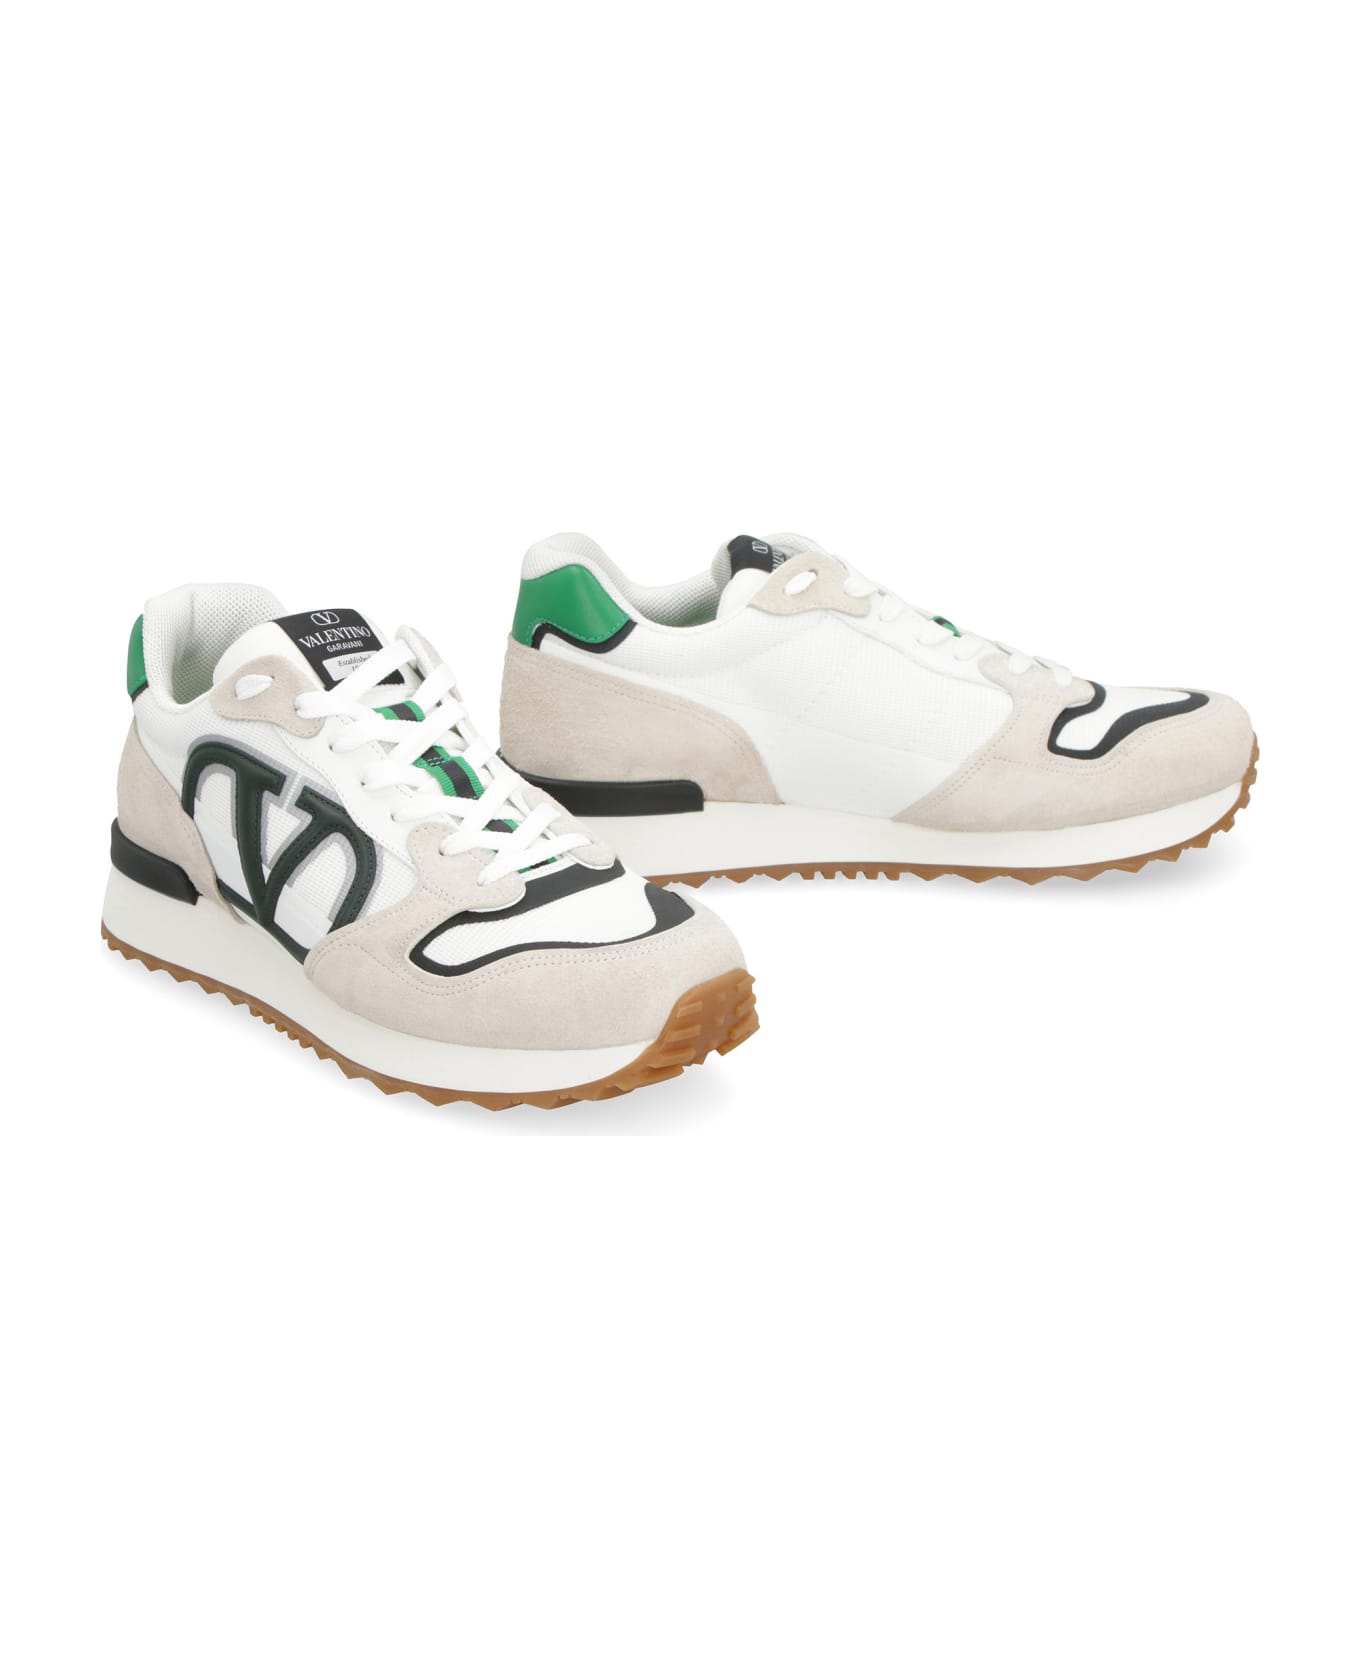 Valentino Garavani - Vlogo Pace Leather And Fabric Low-top Sneakers - White